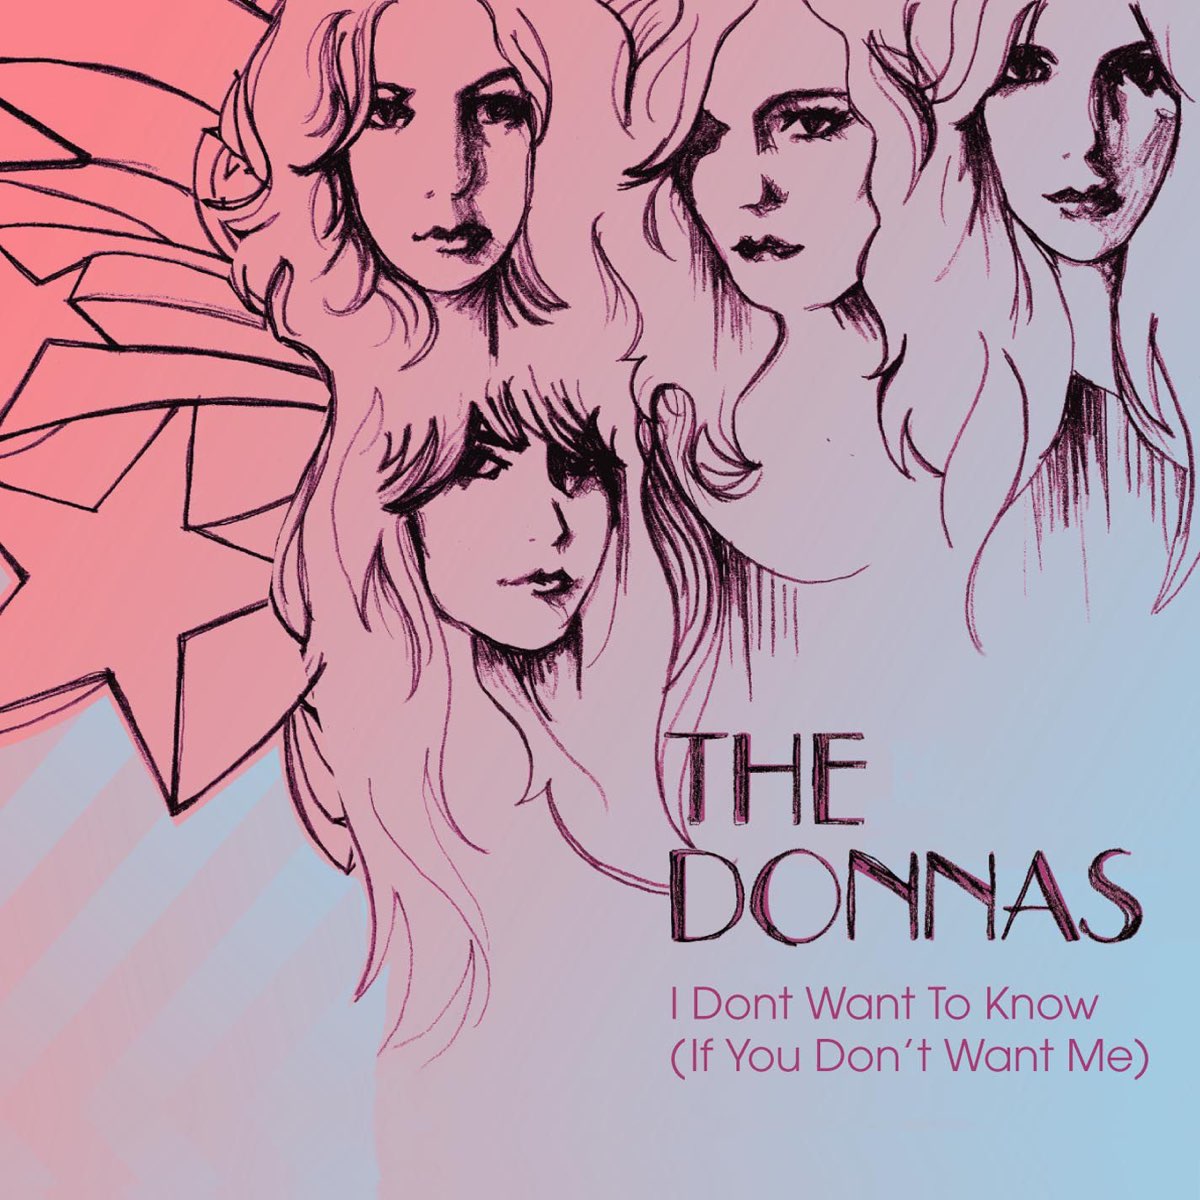 U want know. Donna. The Donnas - Bitchin' (2007). Рисунки Donna. Don't you want me.